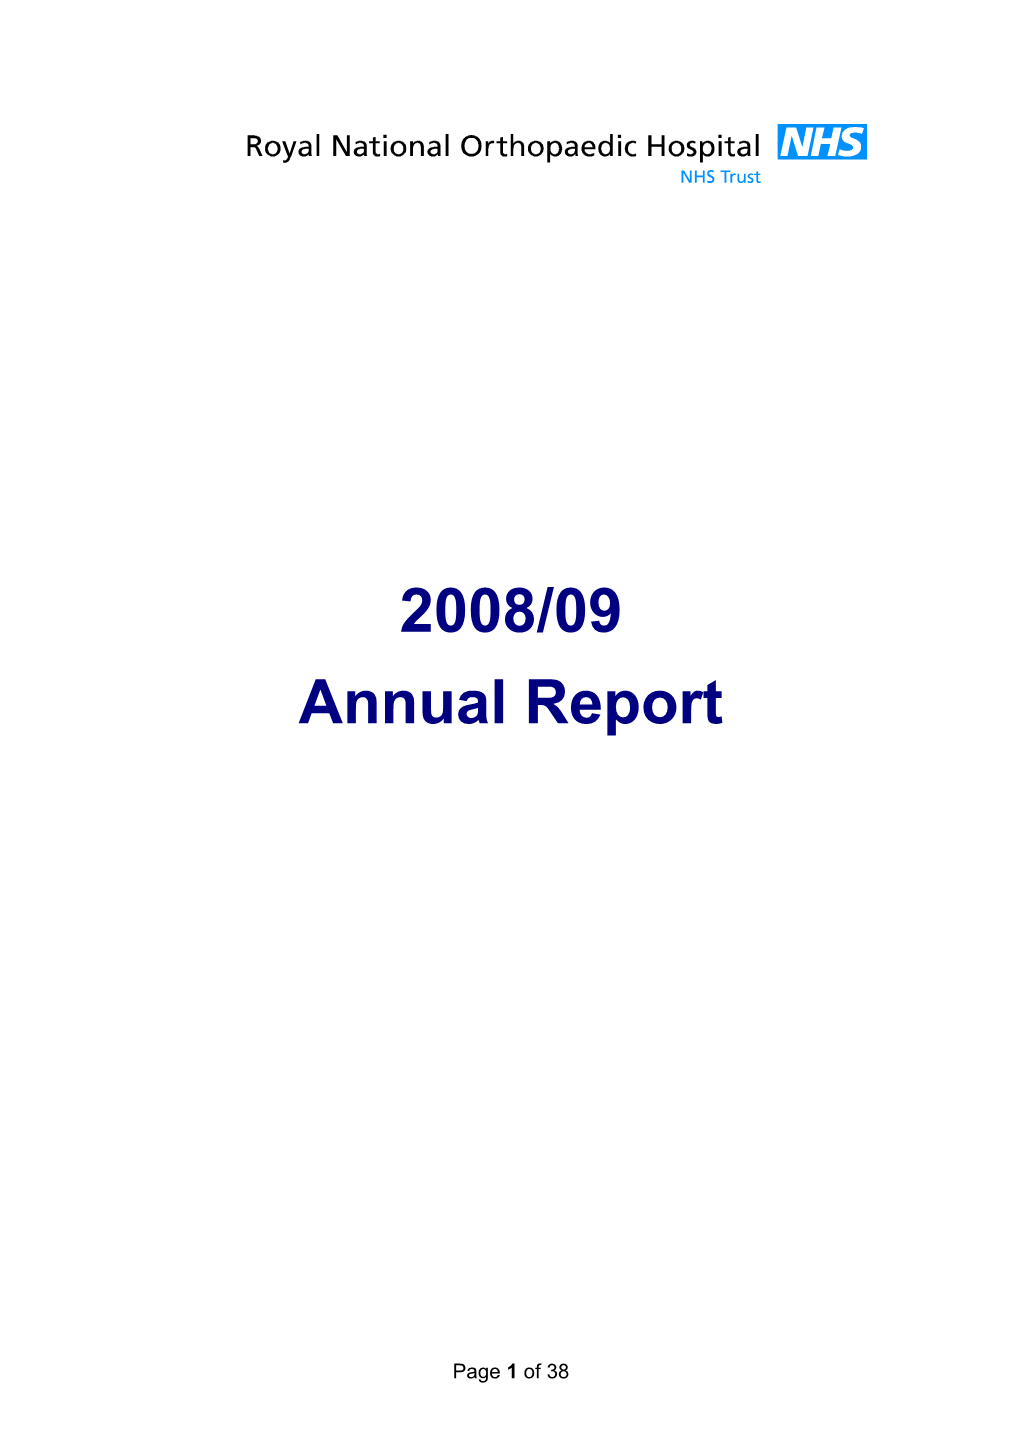 Annual Report and Financial Accounts